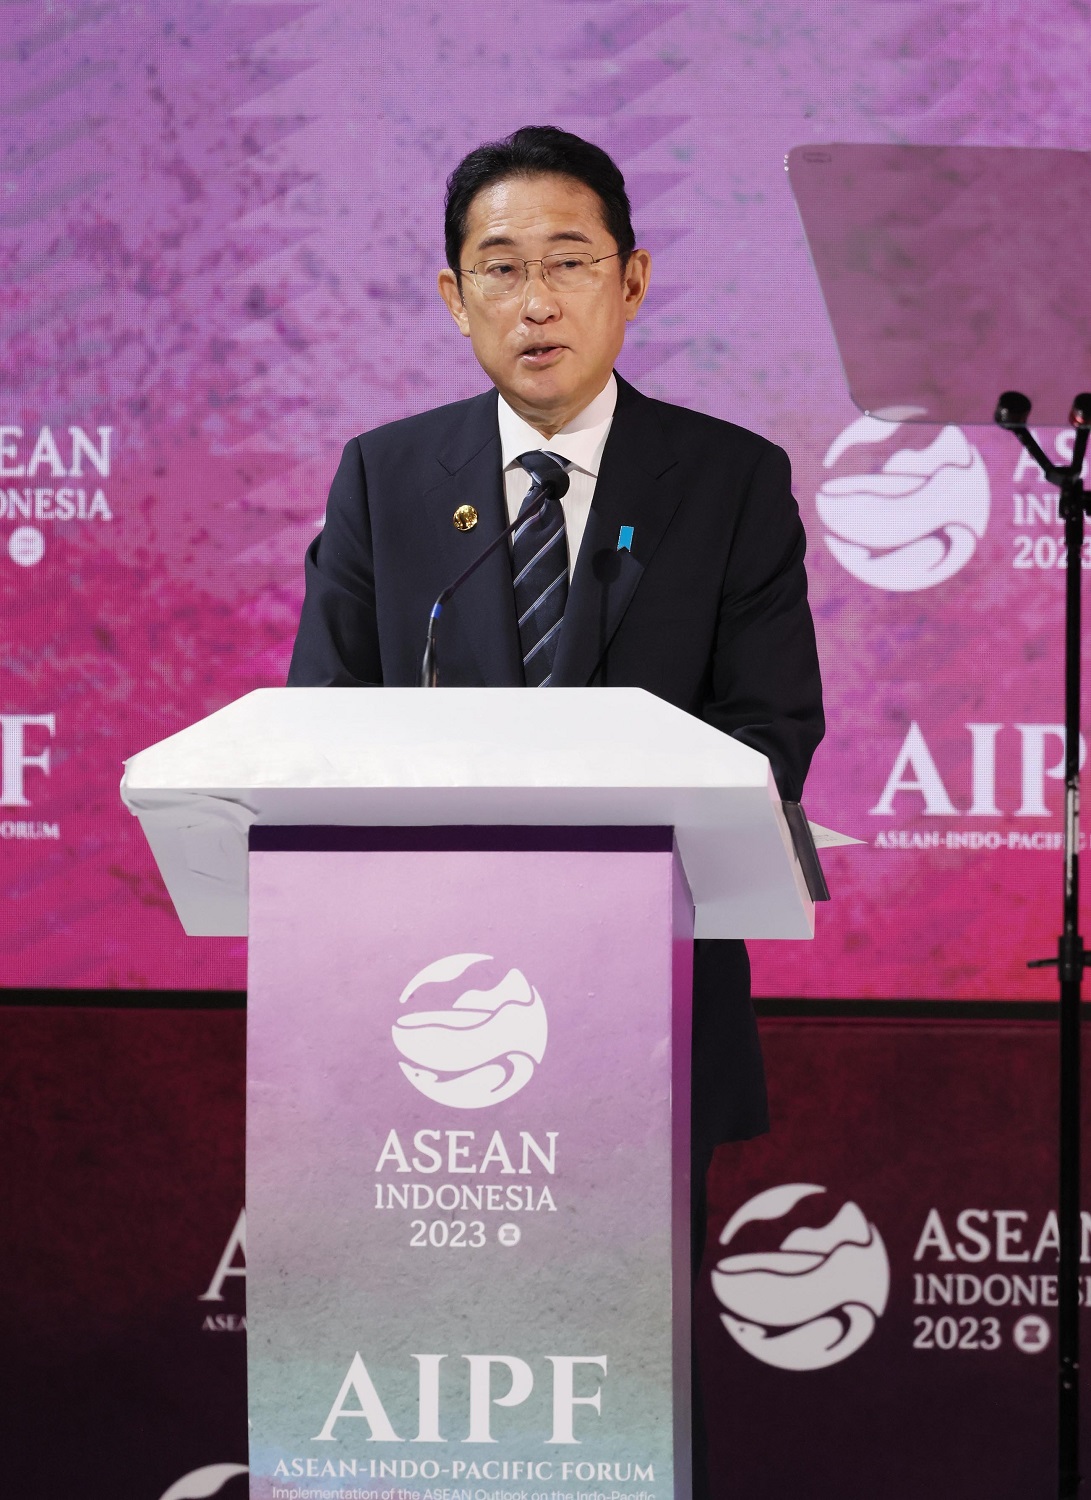 Prime Minister Kishida delivering a speech at the ASEAN-Indo-Pacific Forum (6)